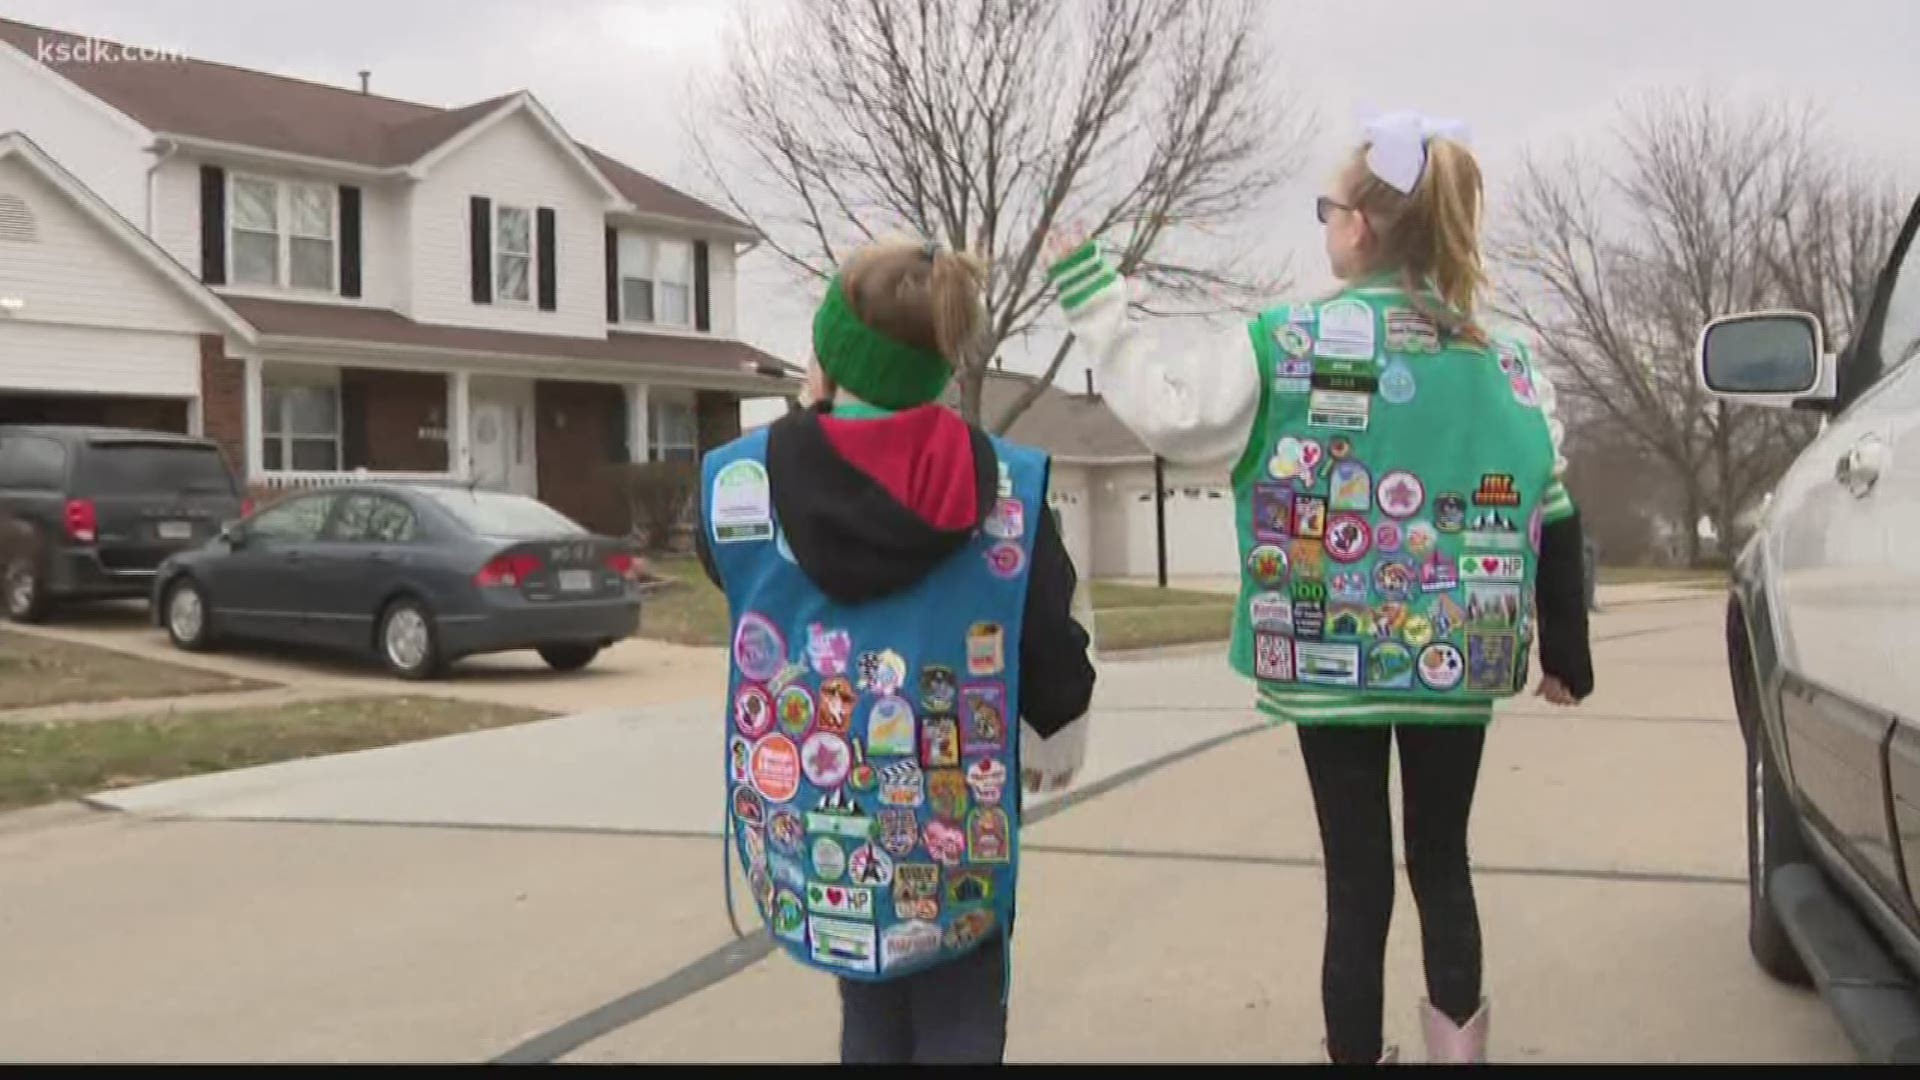 One local Girl Scout has been preparing for cookie season for weeks, trying to keep her streak alive as the highest selling scout in the St. Louis area.